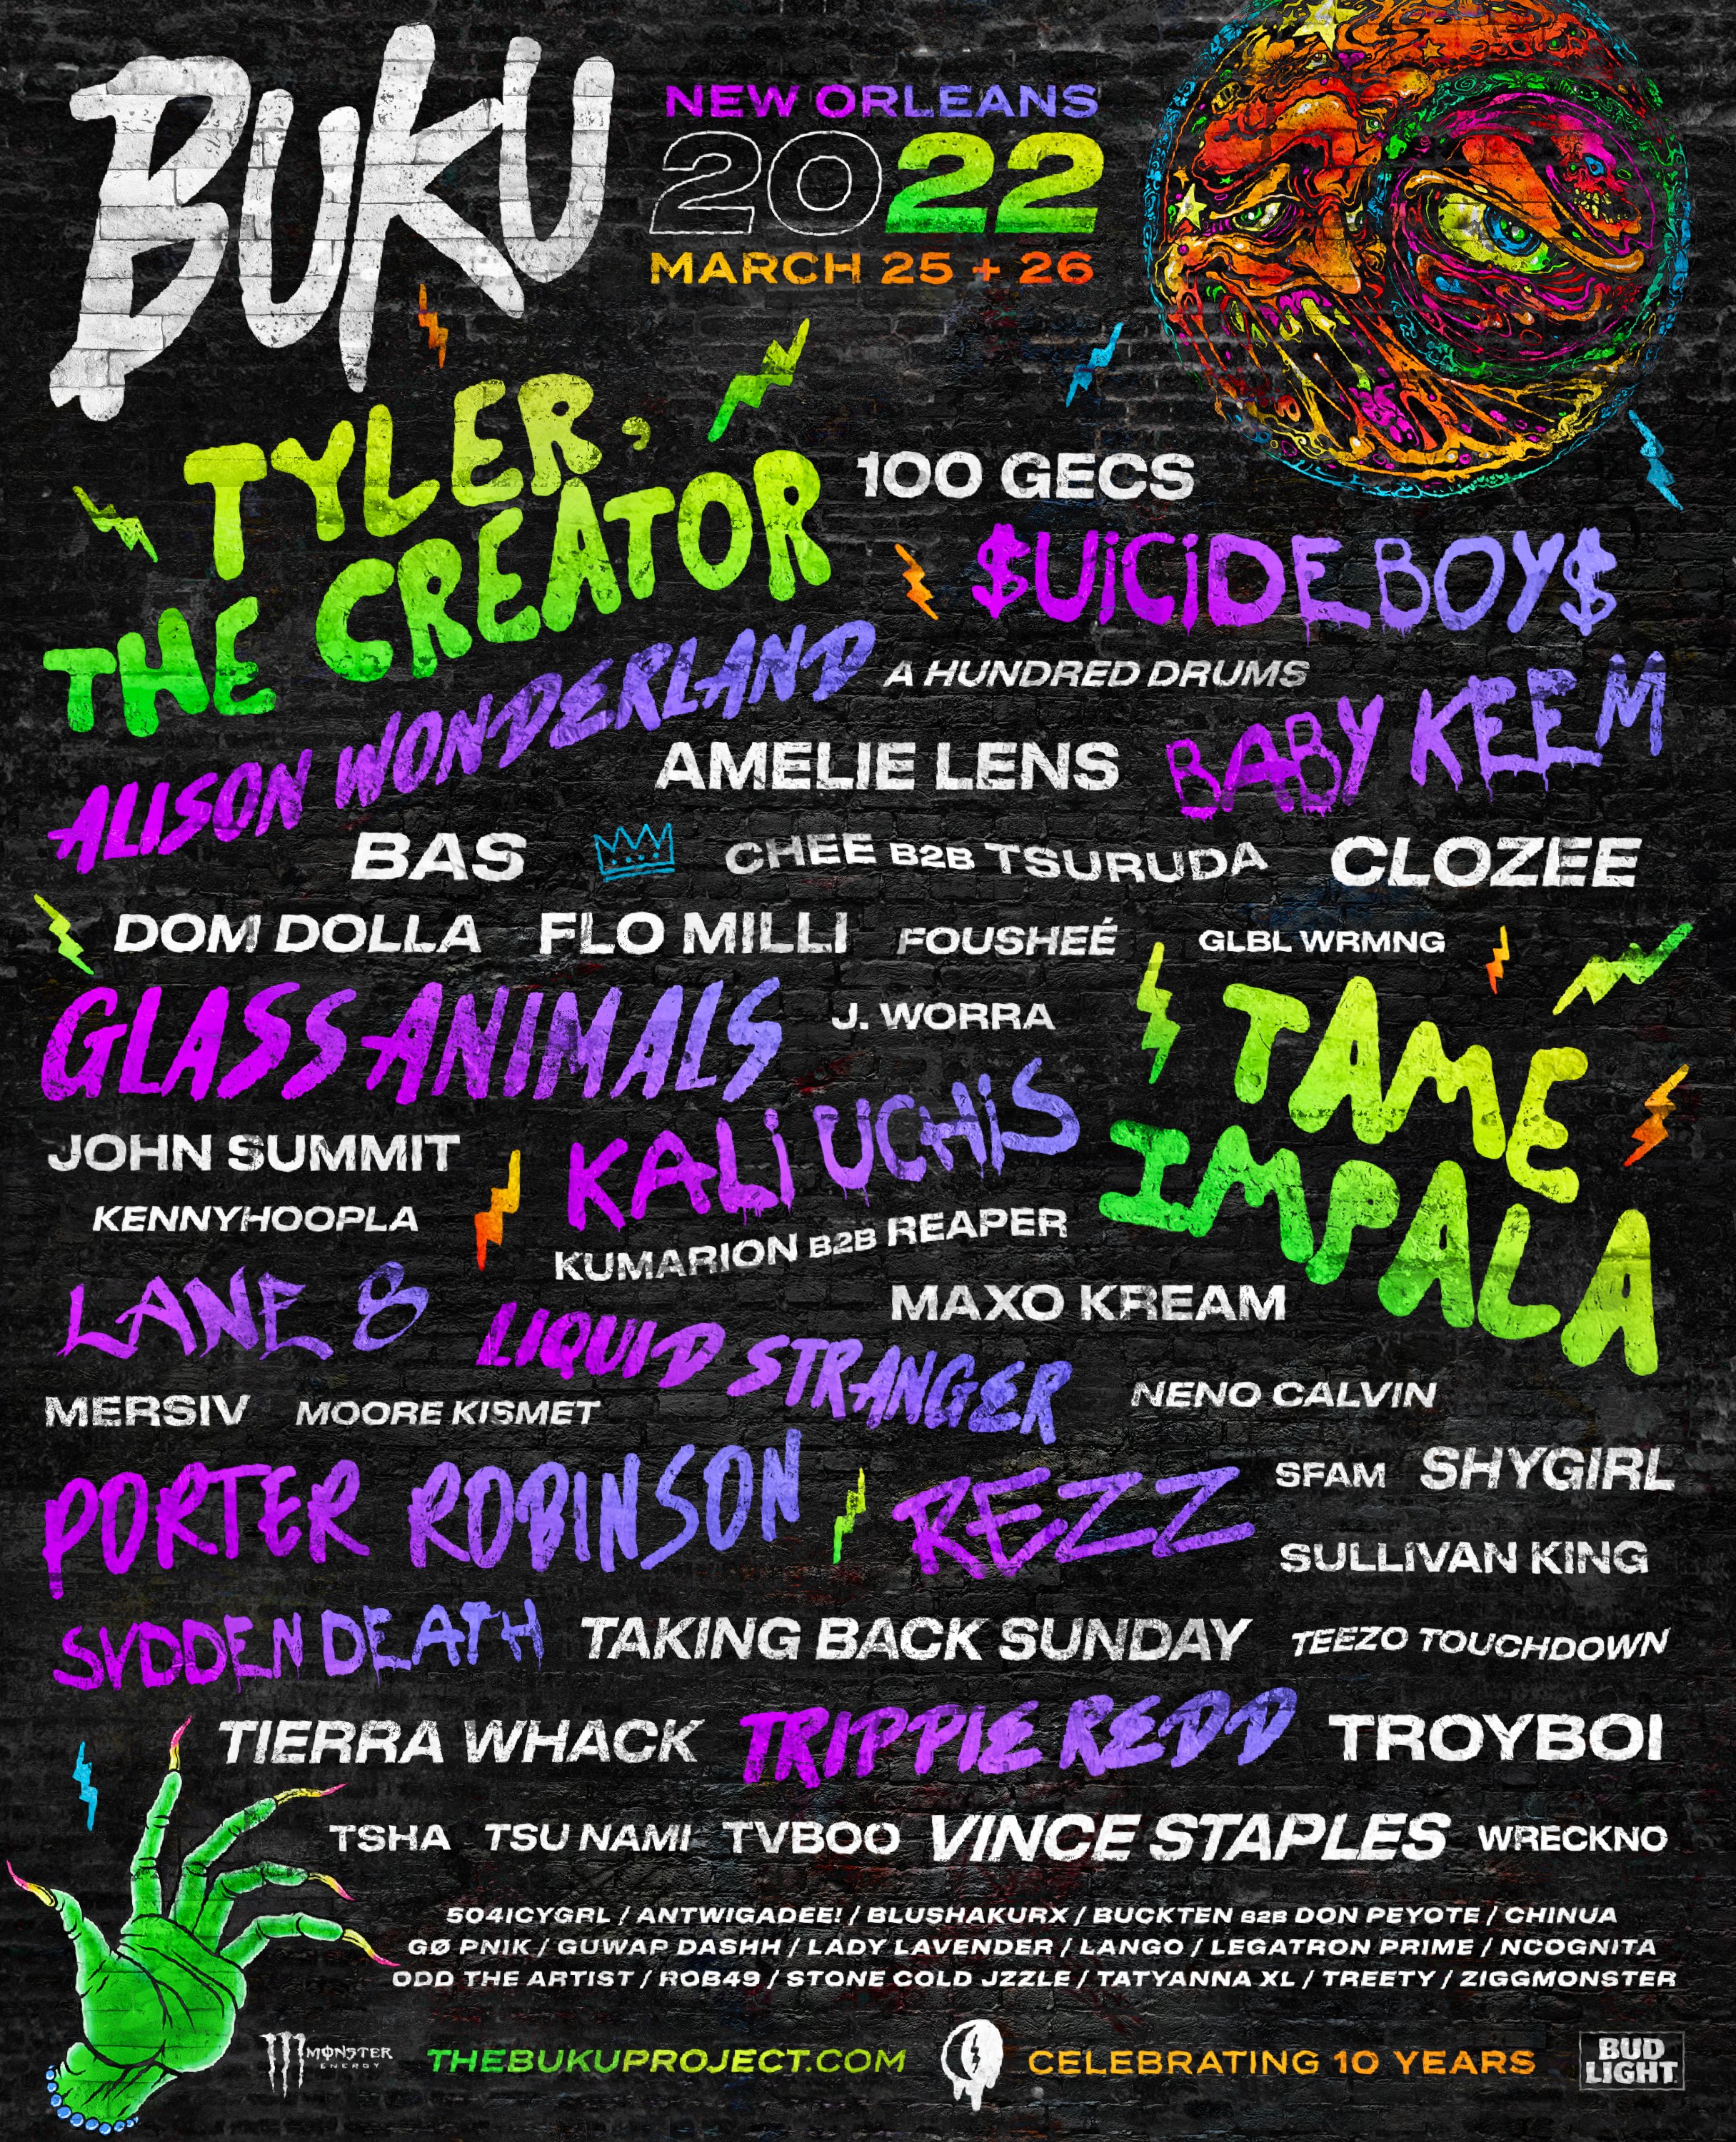 A flyer for the 2022 Buku fest is shown